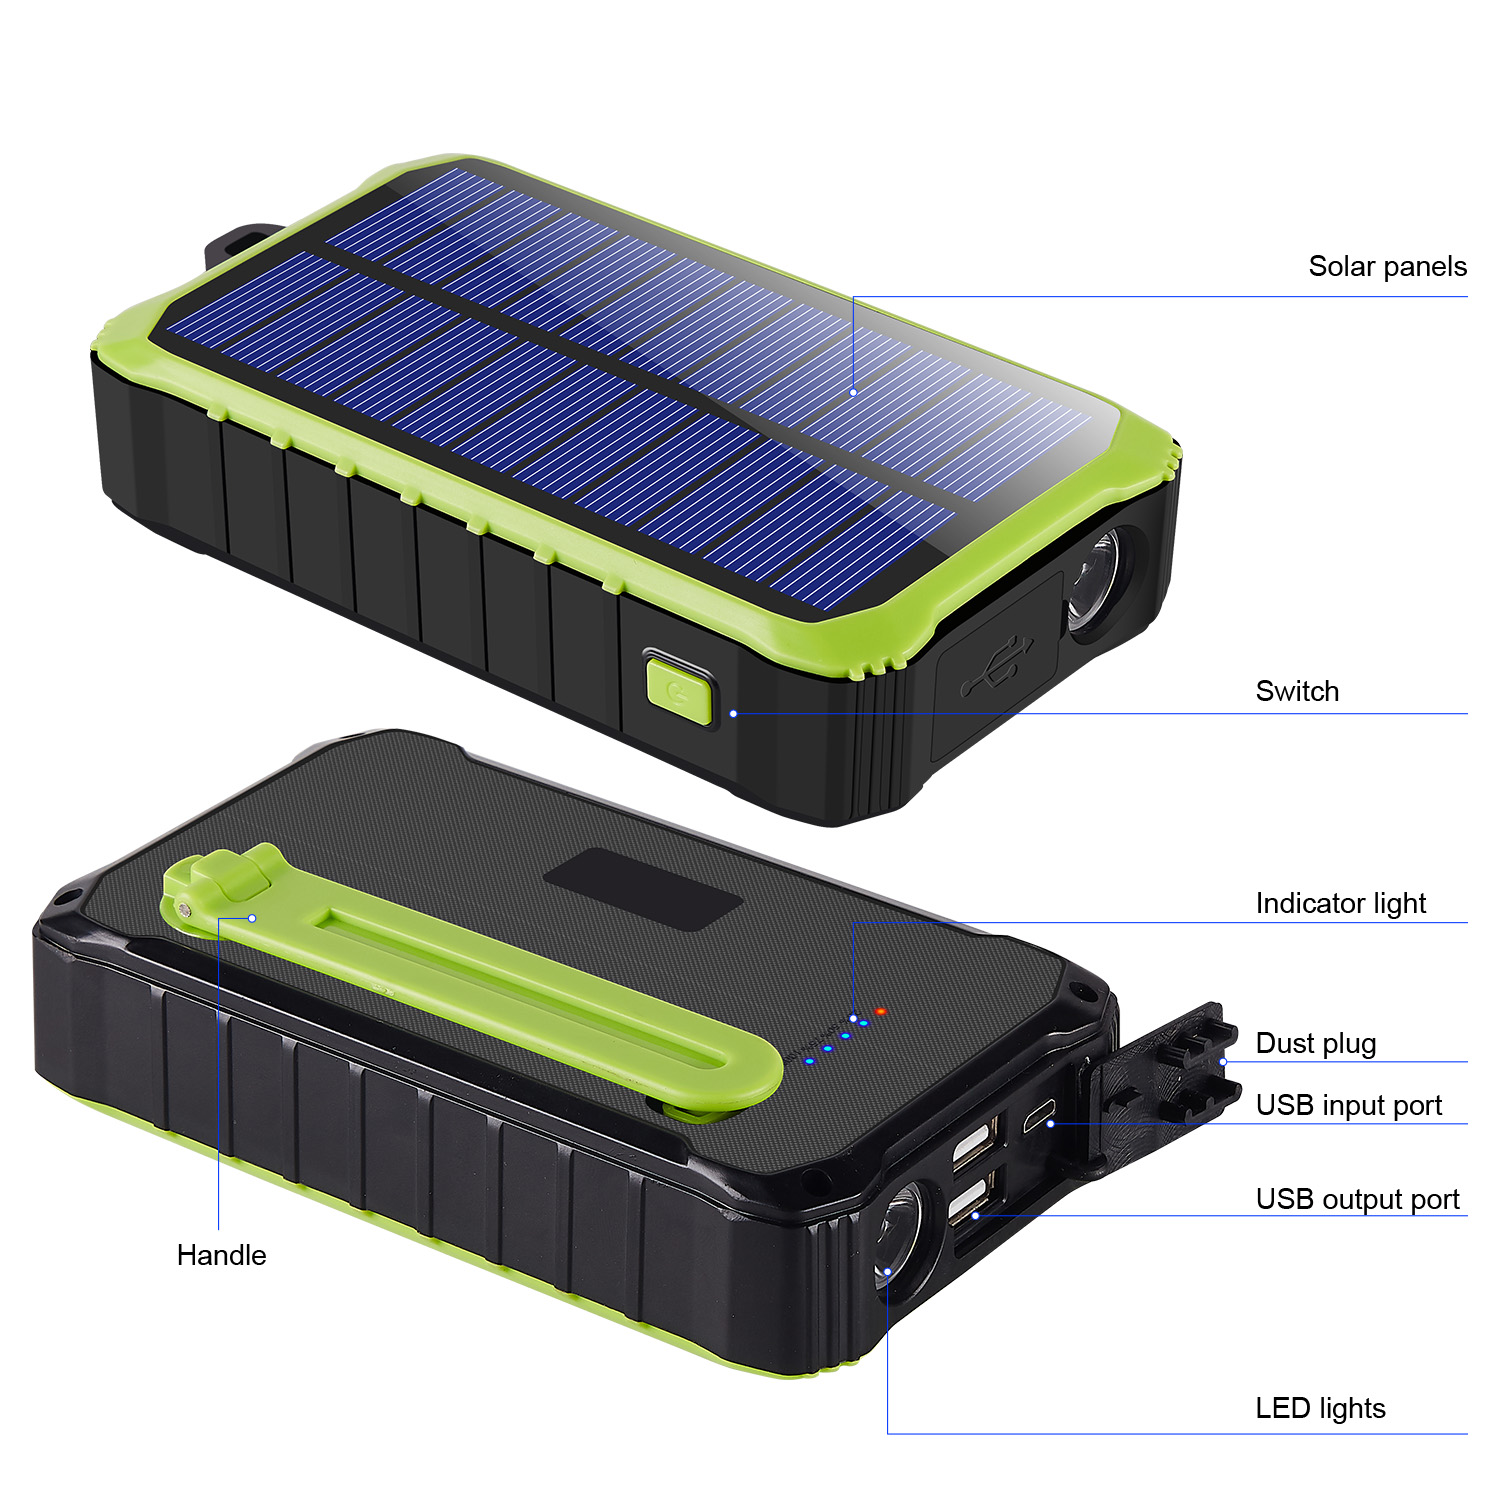 Bakeey-WTKD-083-12000mAh-Hand-Crank-Emergency-Solar-Power-Phone-Charger-Power-Bank-for-Samsung-Galax-1873577-8